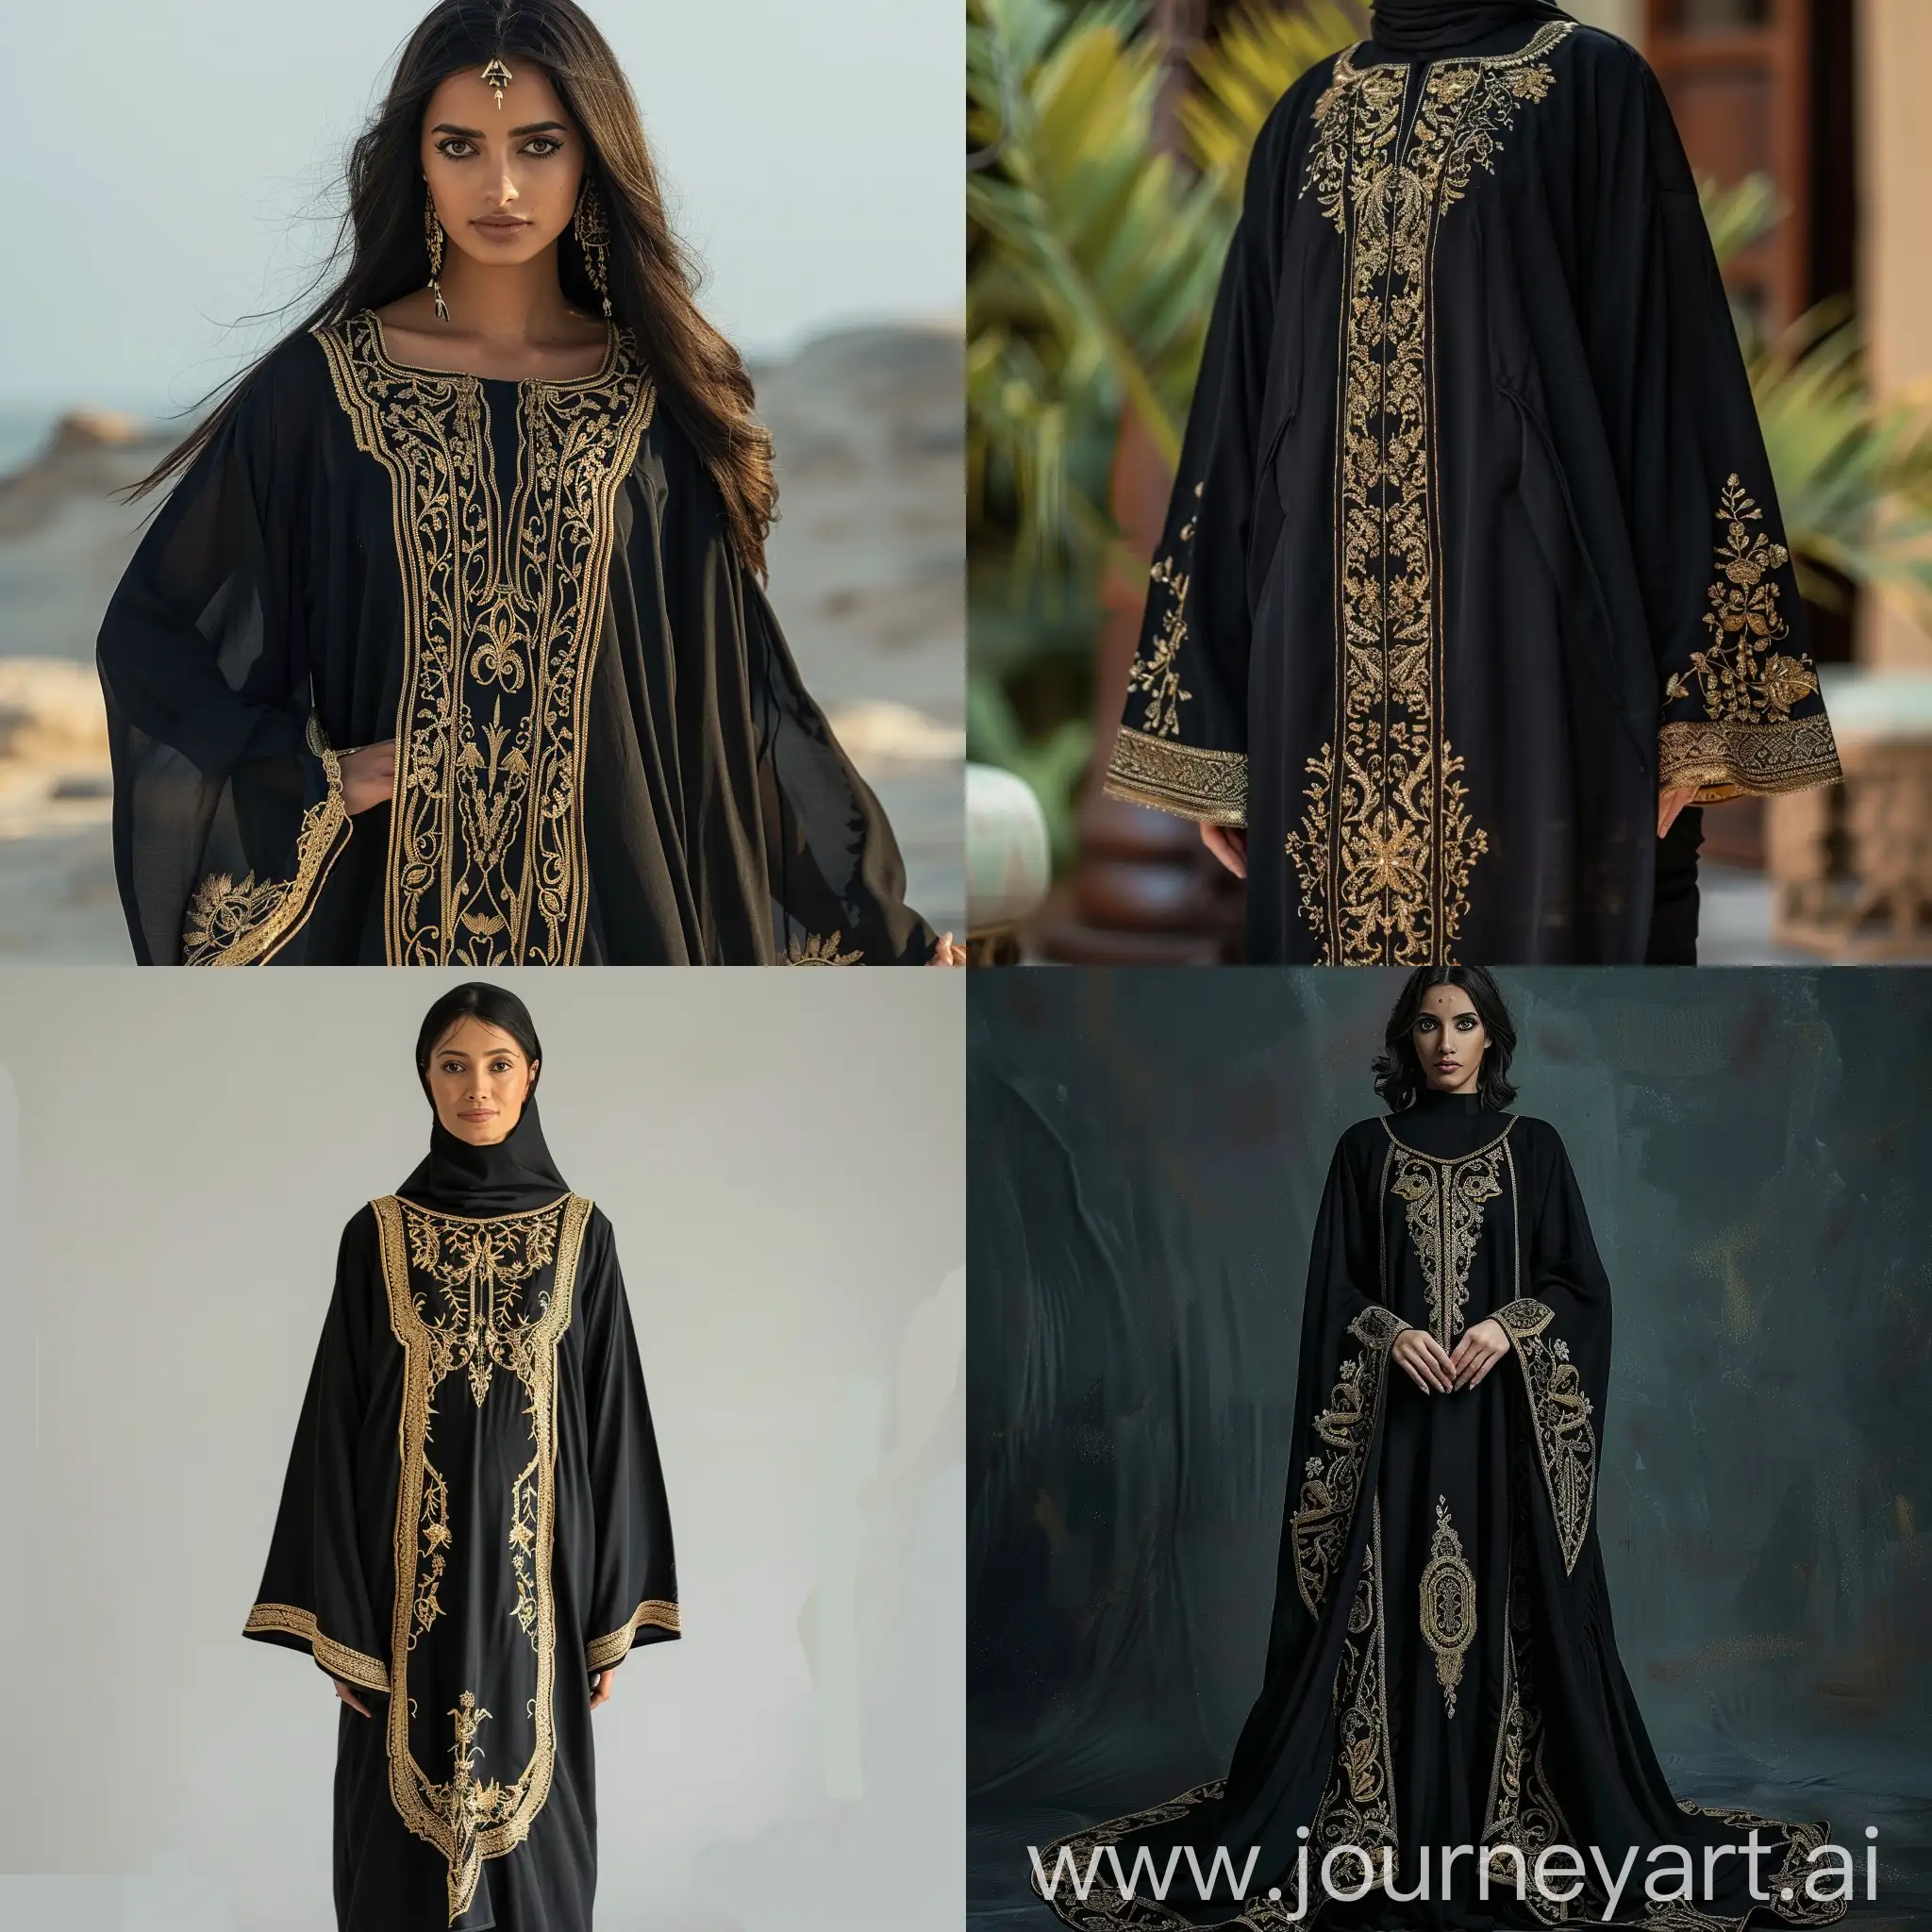 Elegant-Black-Caftan-with-Gold-Embroidery-Fashionable-30YearOld-Style